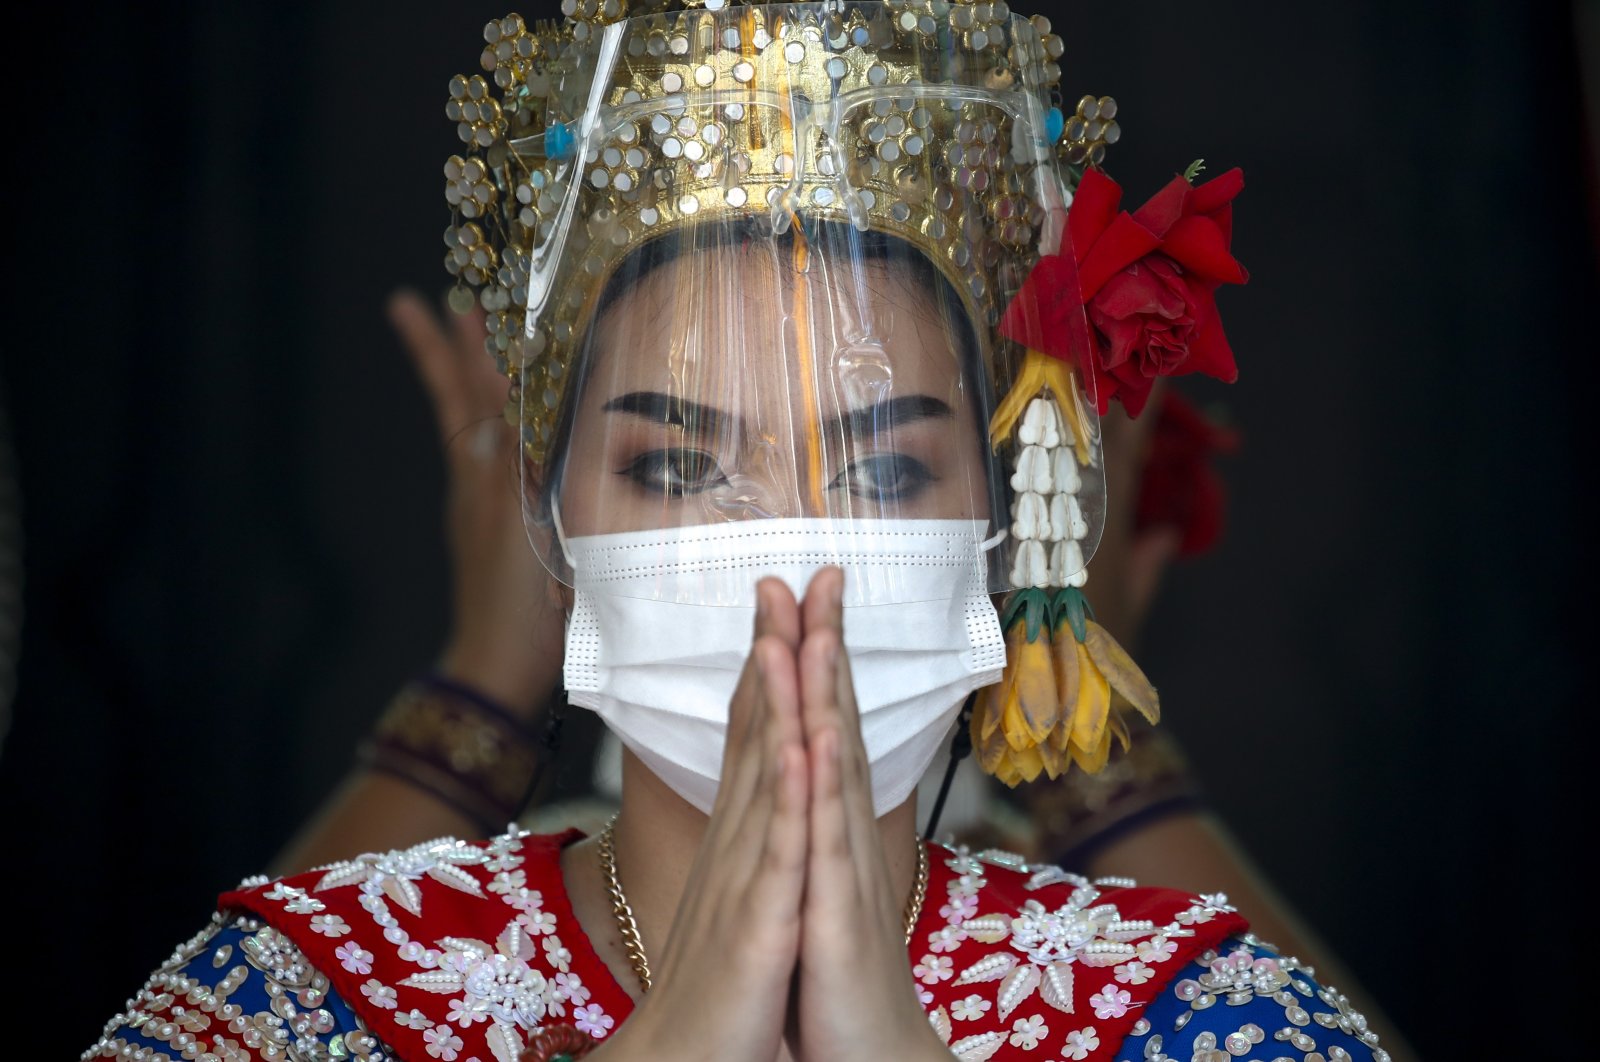 A Thai dancer wears a face mask and face shield during a performance to worship Lord Brahma, the Hindu God of creation, at the nearly empty tourist spot of Erawan Shrine in Bangkok, Thailand, Dec. 21, 2021. (EPA Photo)